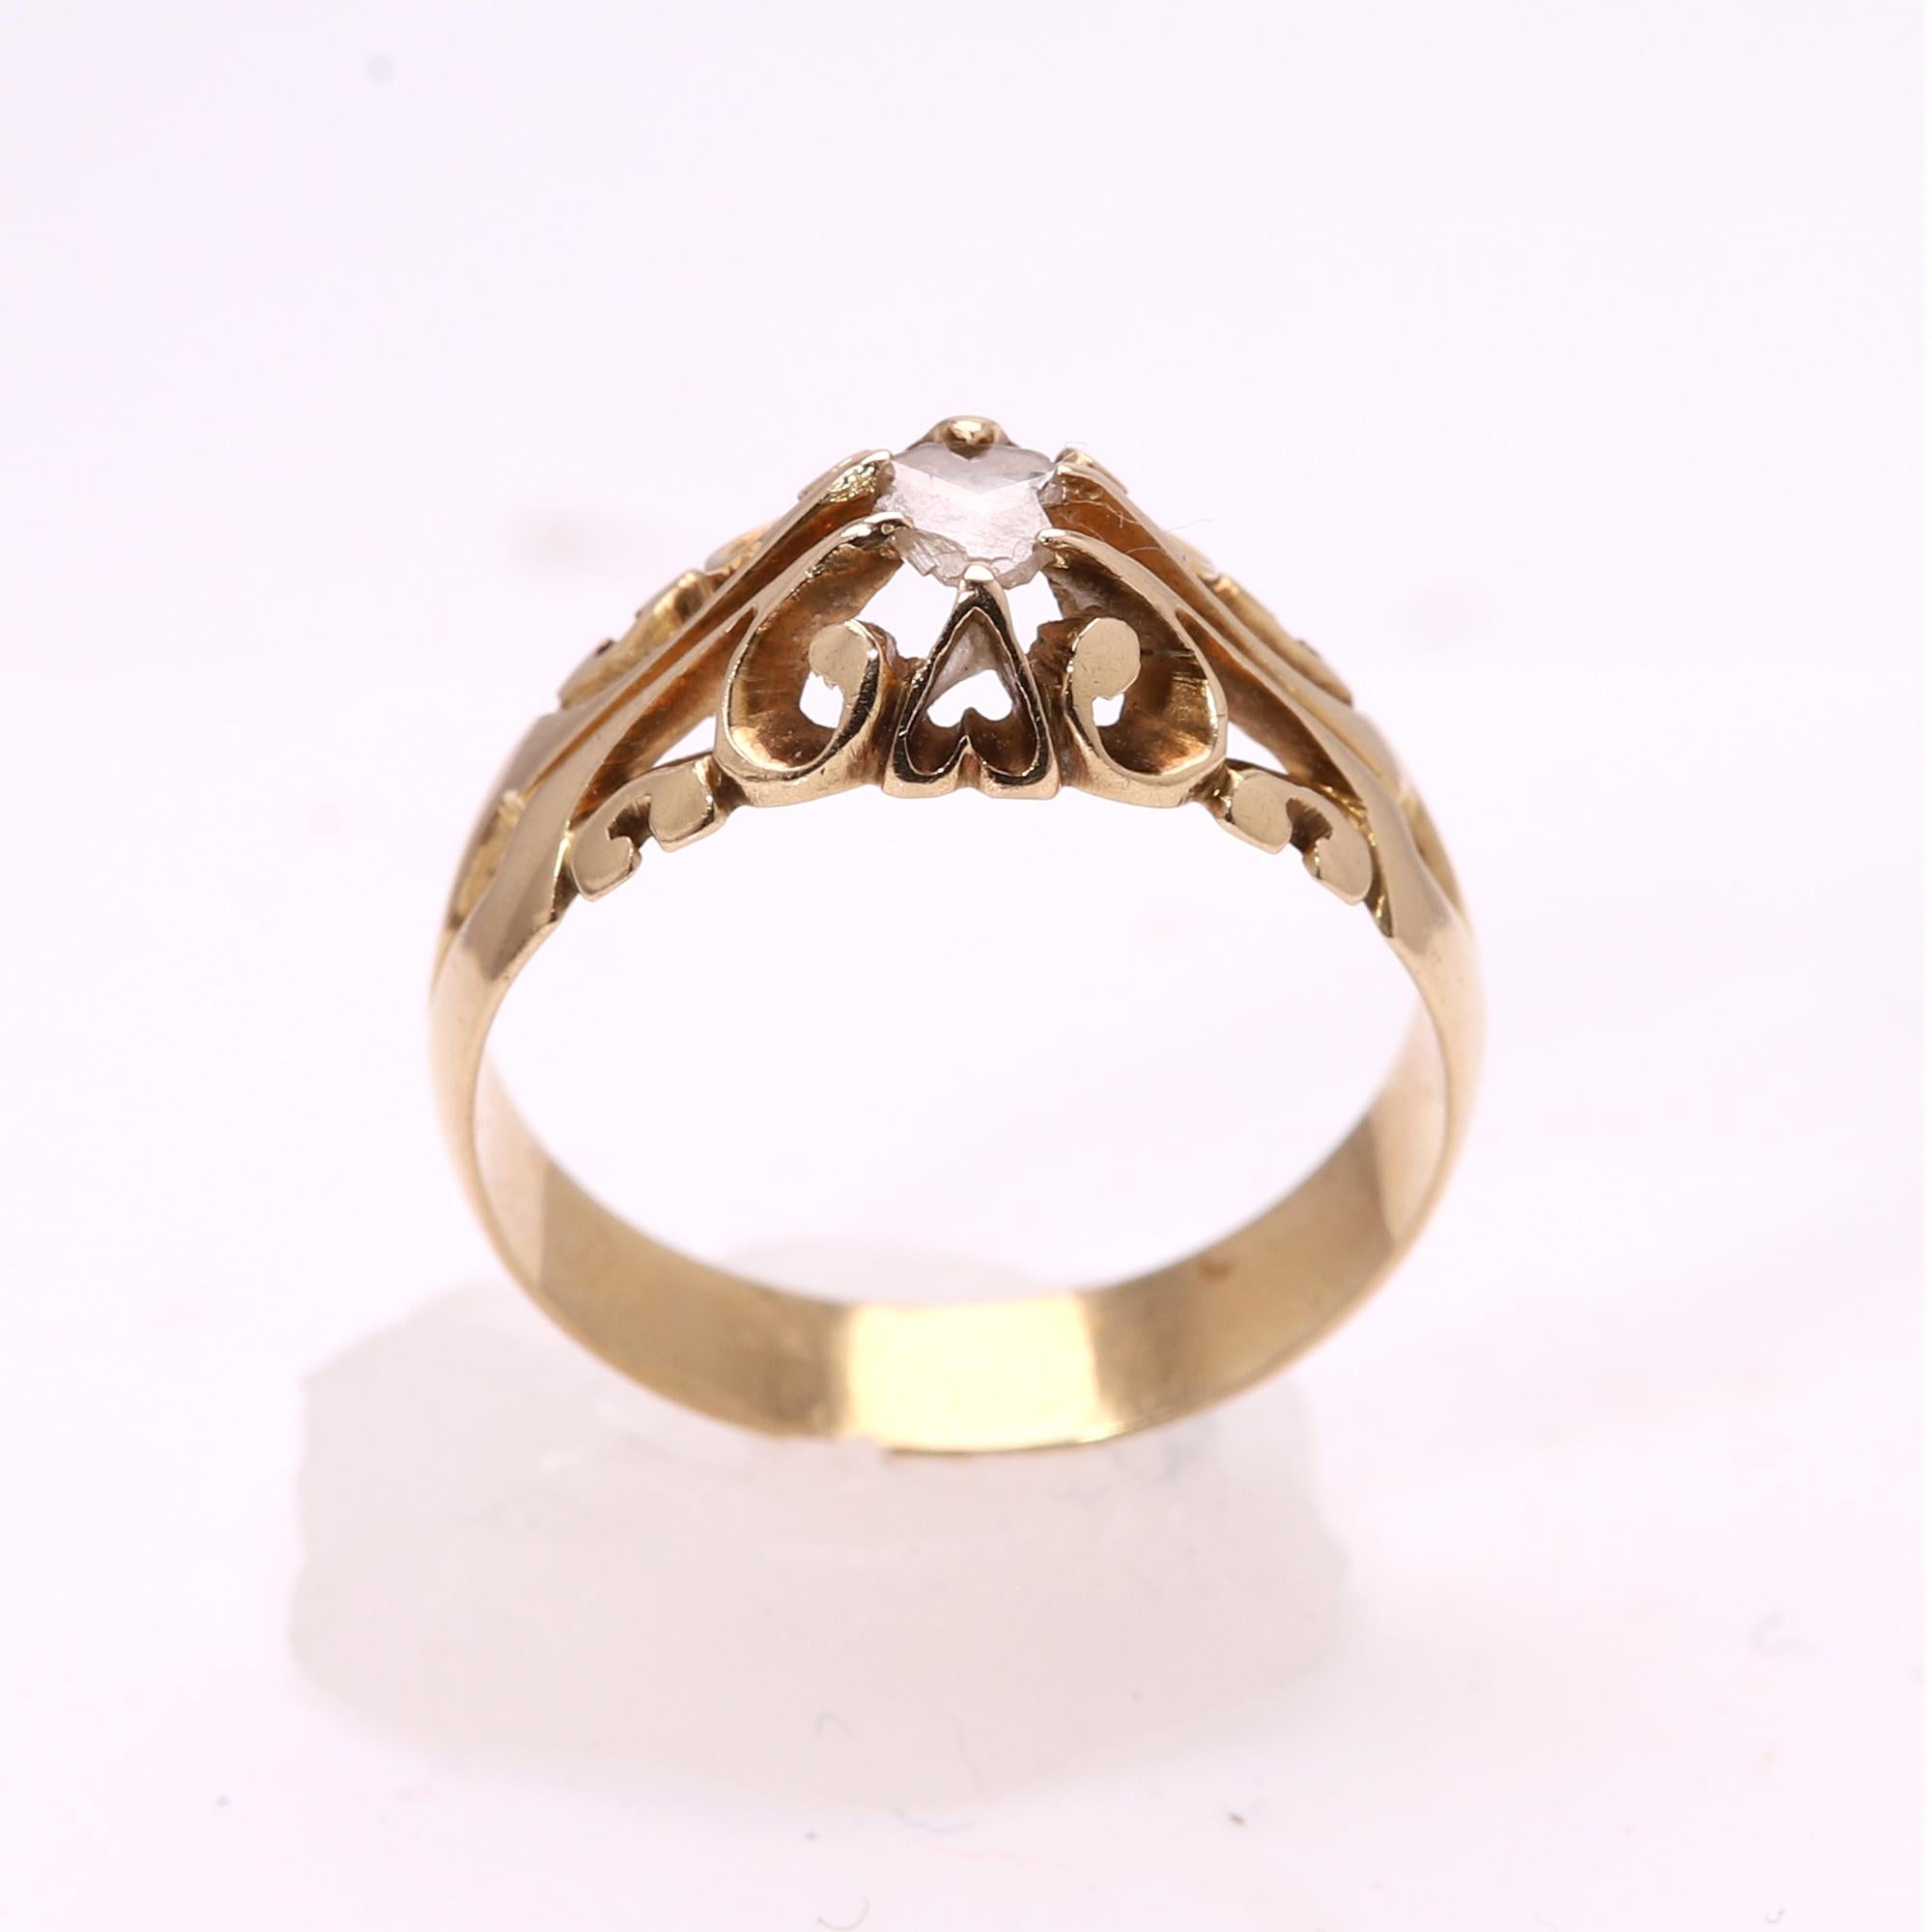 Old Mine Cut Antique Art Nouveau Ring 18 Karat Yellow Gold with a Sliced Diamonds For Sale